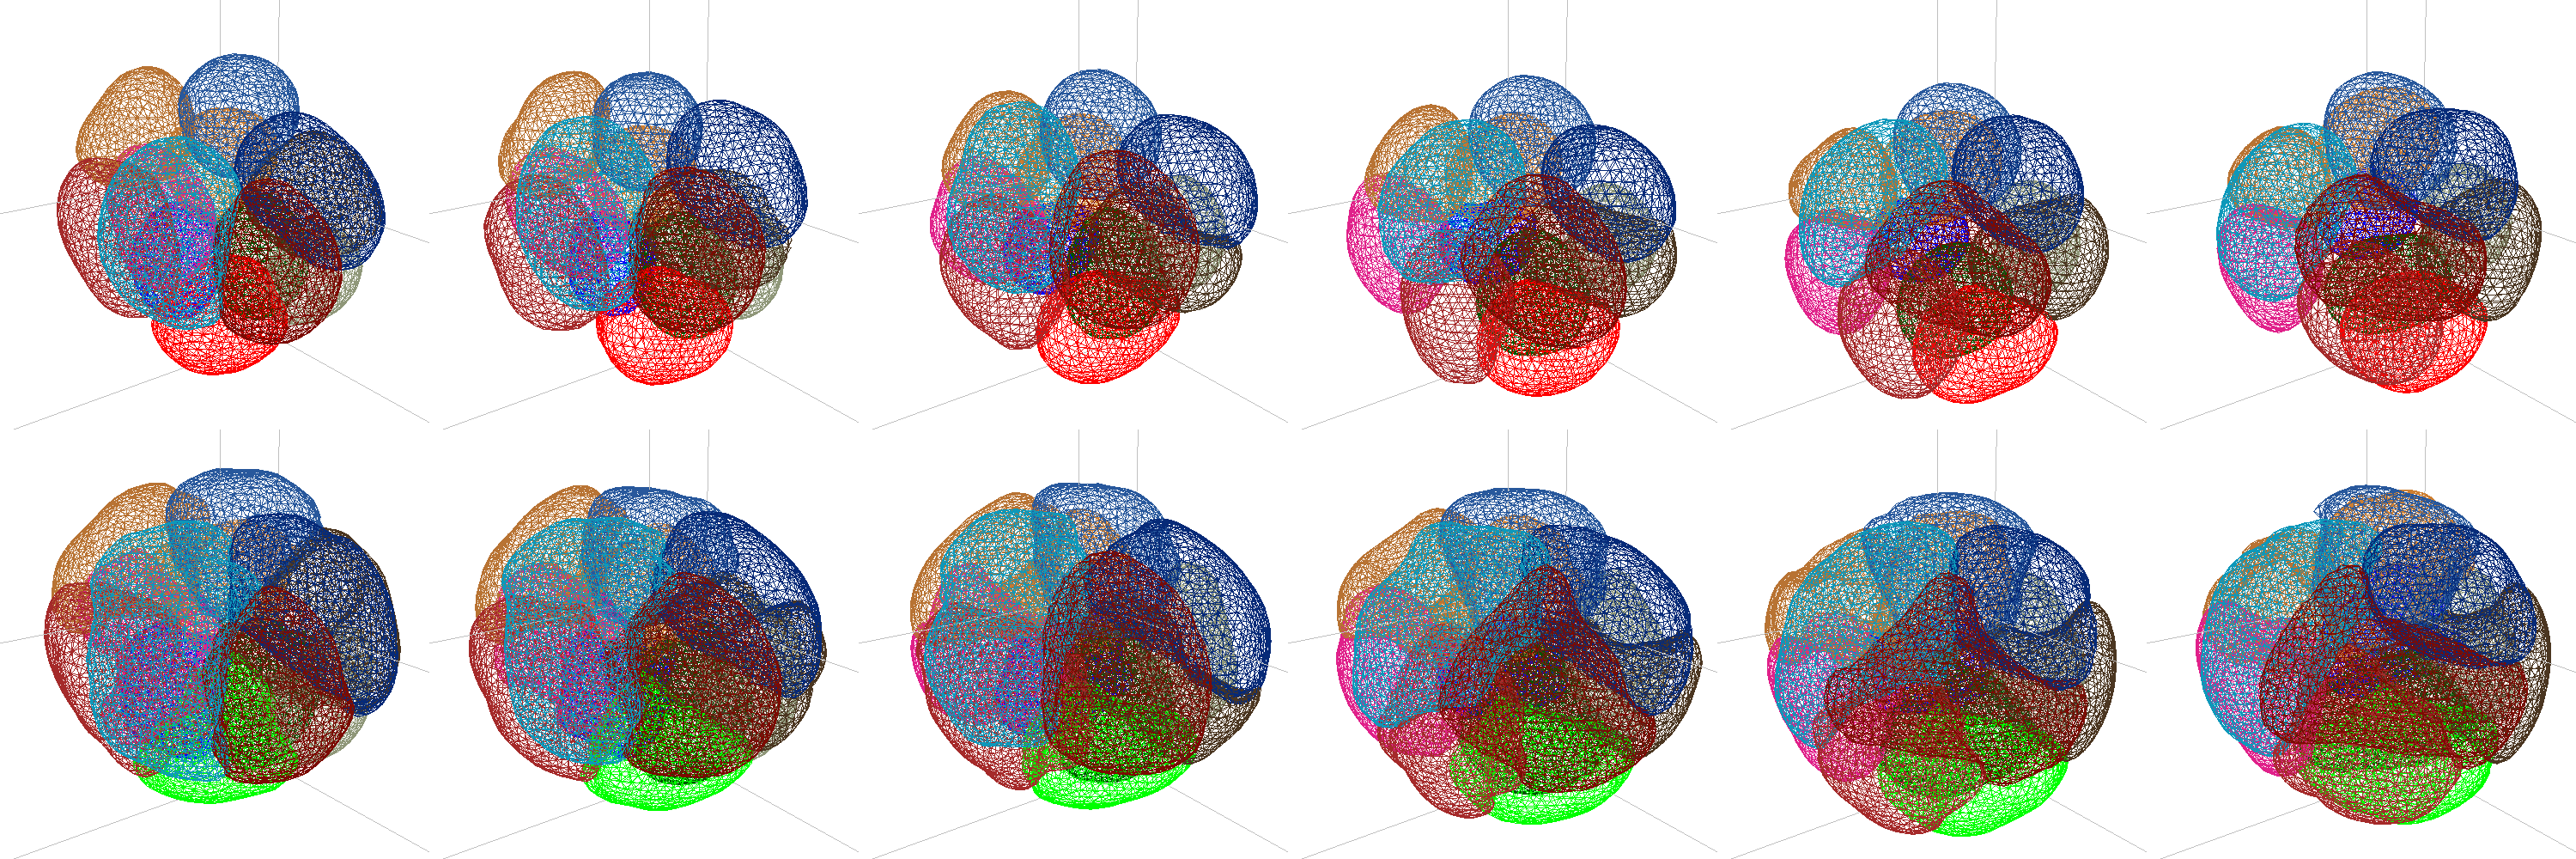 montage of nuclei and membrane meshes